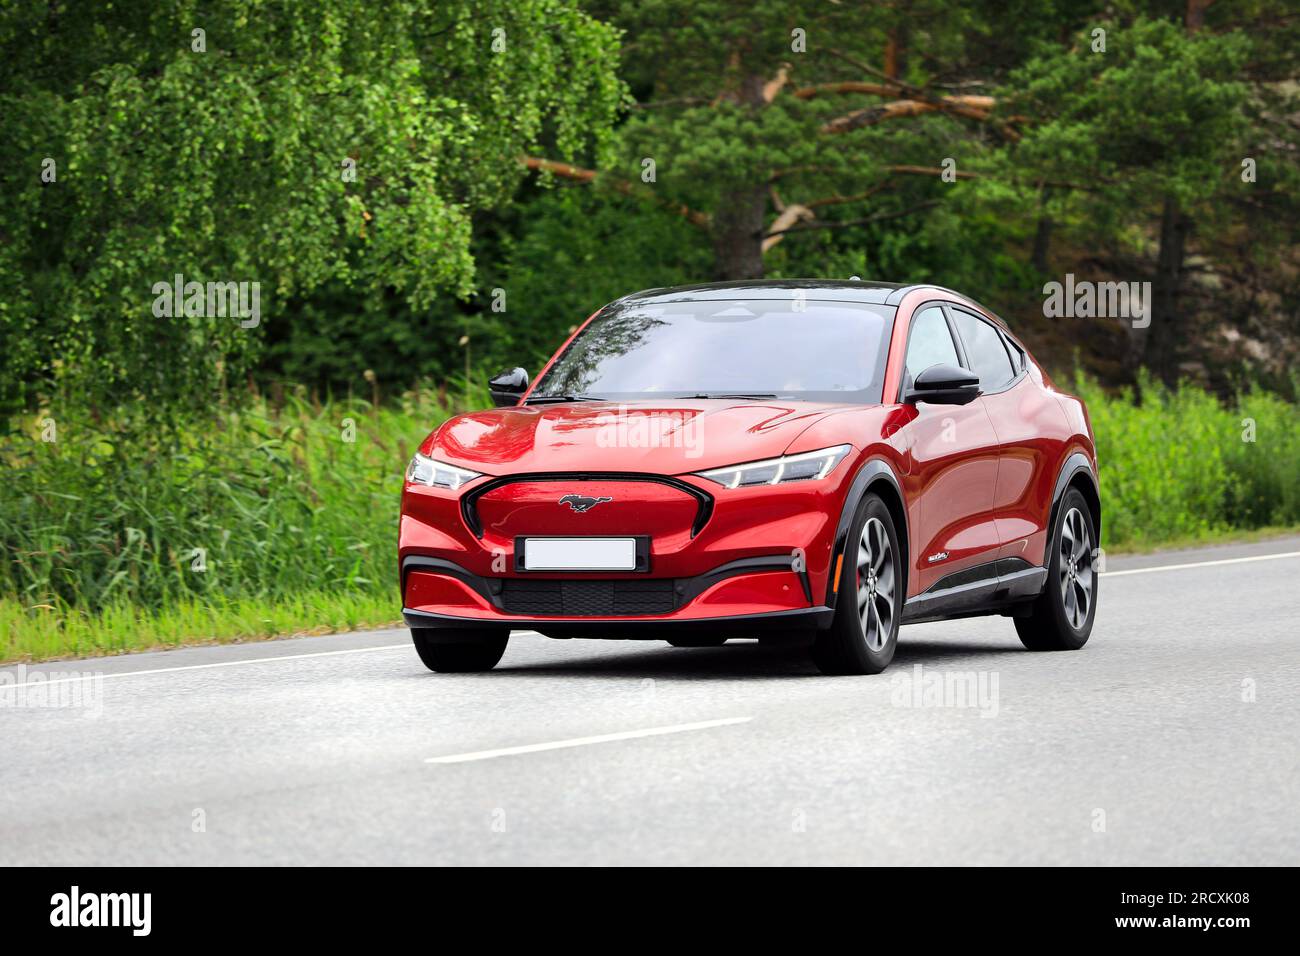 Red battery electric Ford Mustang Mach-E compact crossover SUV car at speed on road on a day of summer. Salo, Finland. July 6, 2023. Stock Photo